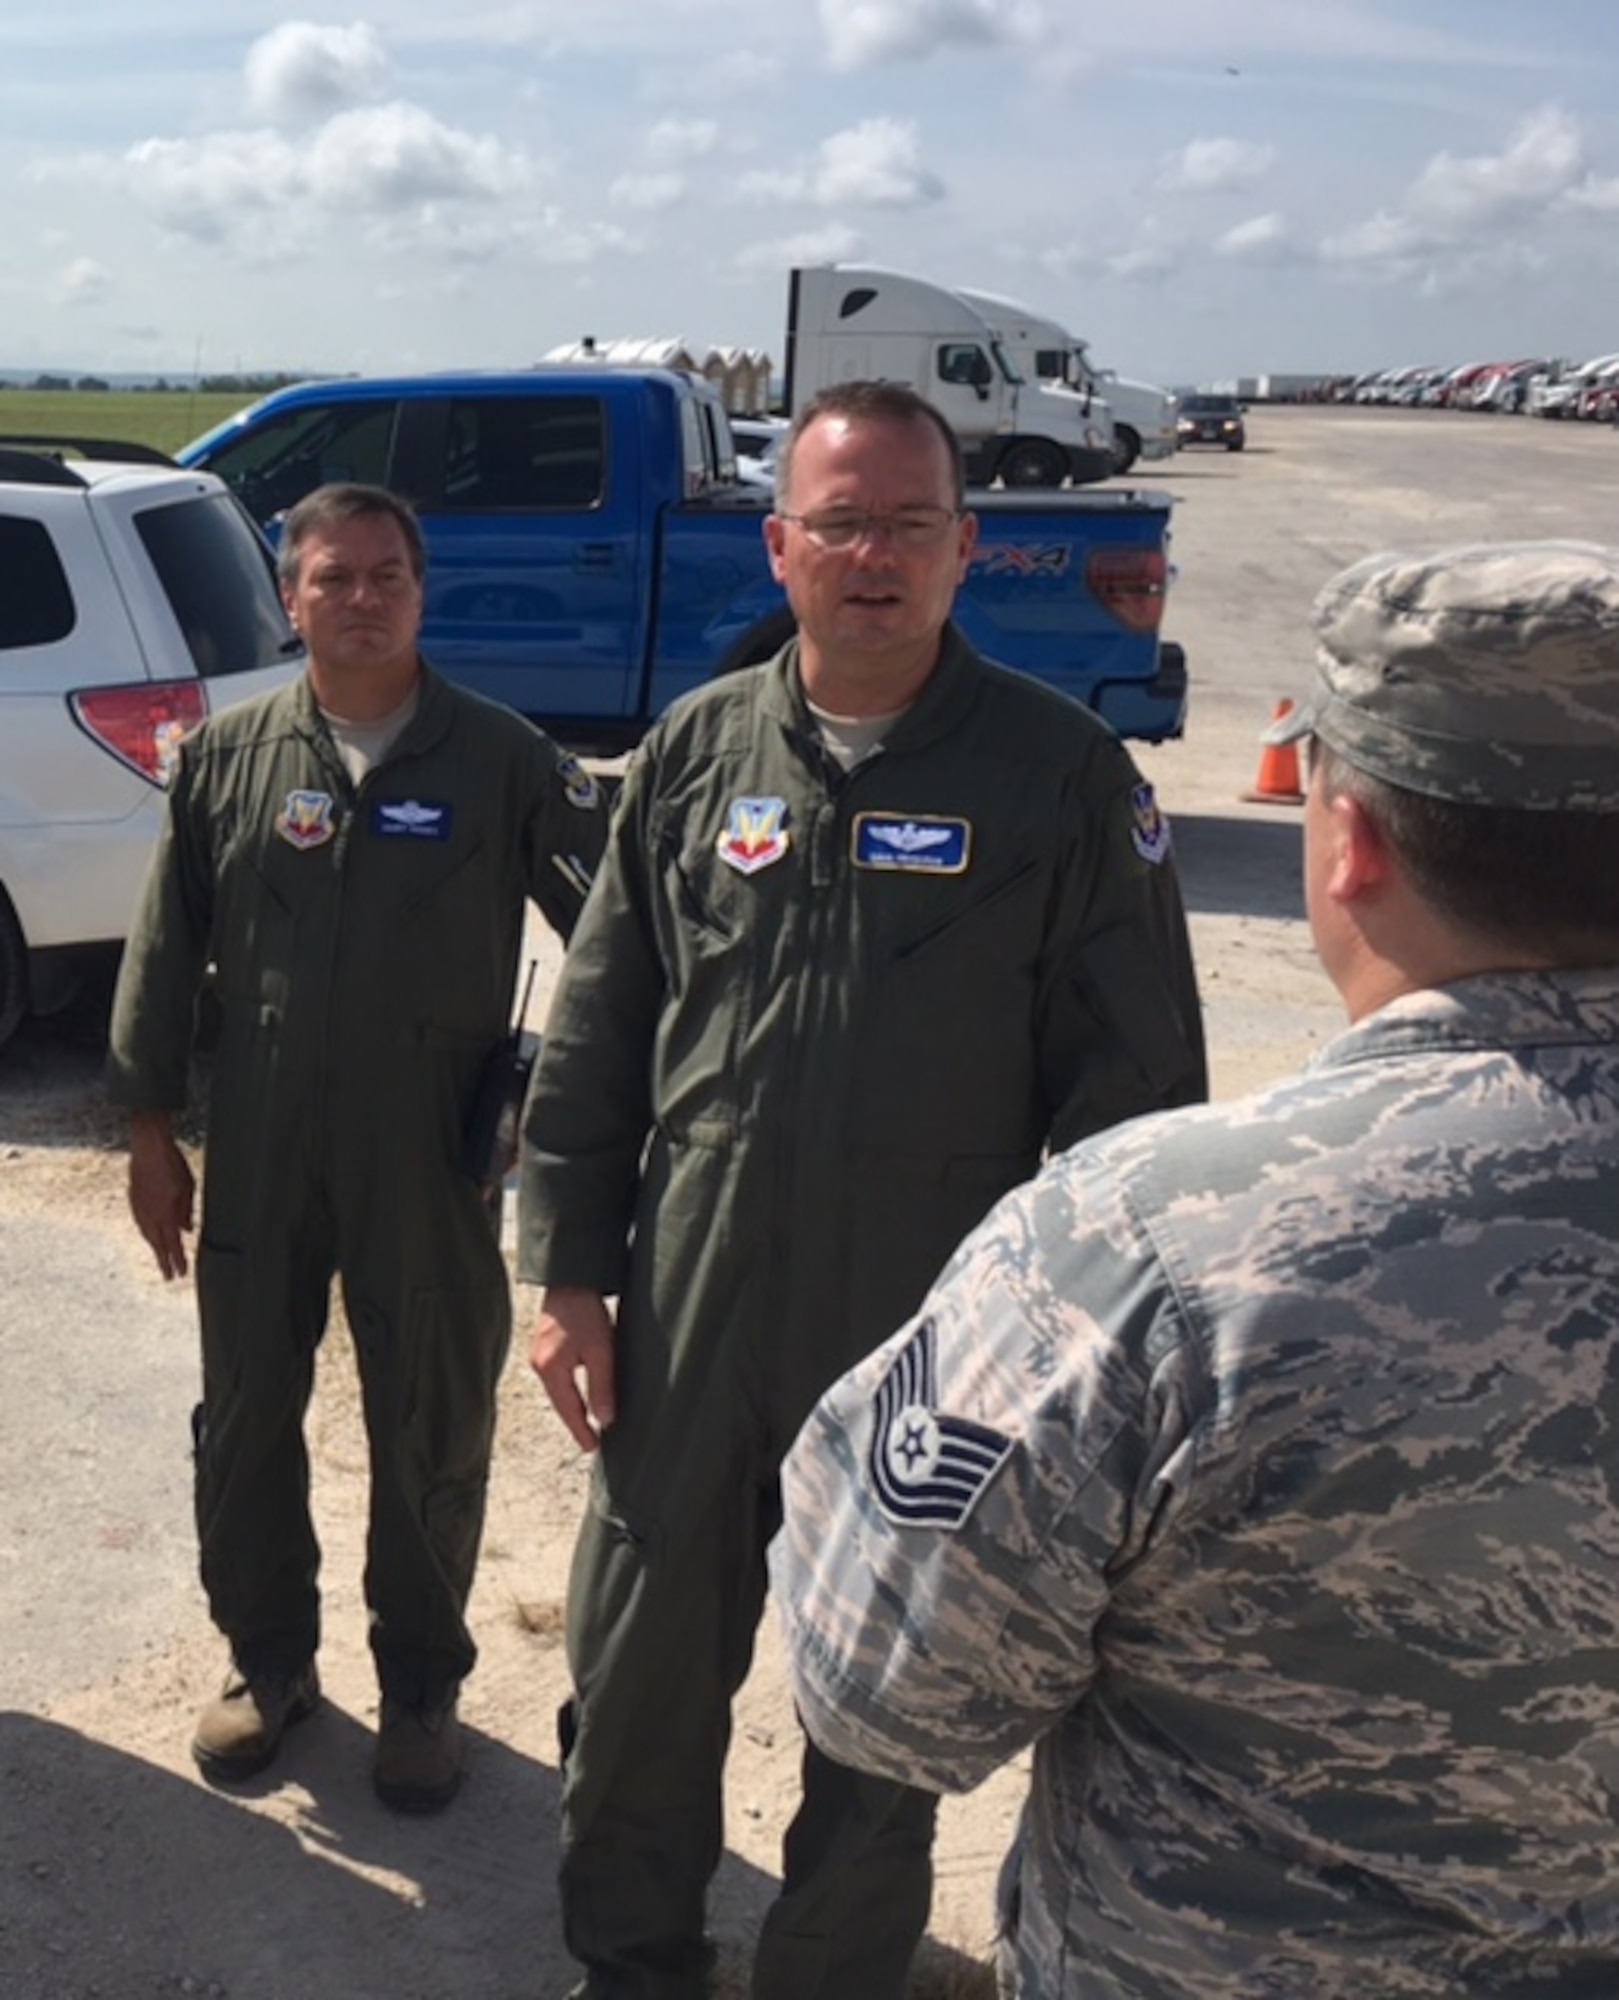 Col. Dave Edwards (right) and Col. Harry Hughes, reservists assigned as Emergency Preparedness Liaison Officers to the Federal Emergency Management Agency, work on the flightline at Joint Base San Antonio-Seguin Auxiliary Airfield Sept. 5, 2017.  Helping local response agencies coordinate with one another is a primary responsibility for EPLOs. (U.S. Air Force photo by Dan Hawkins)